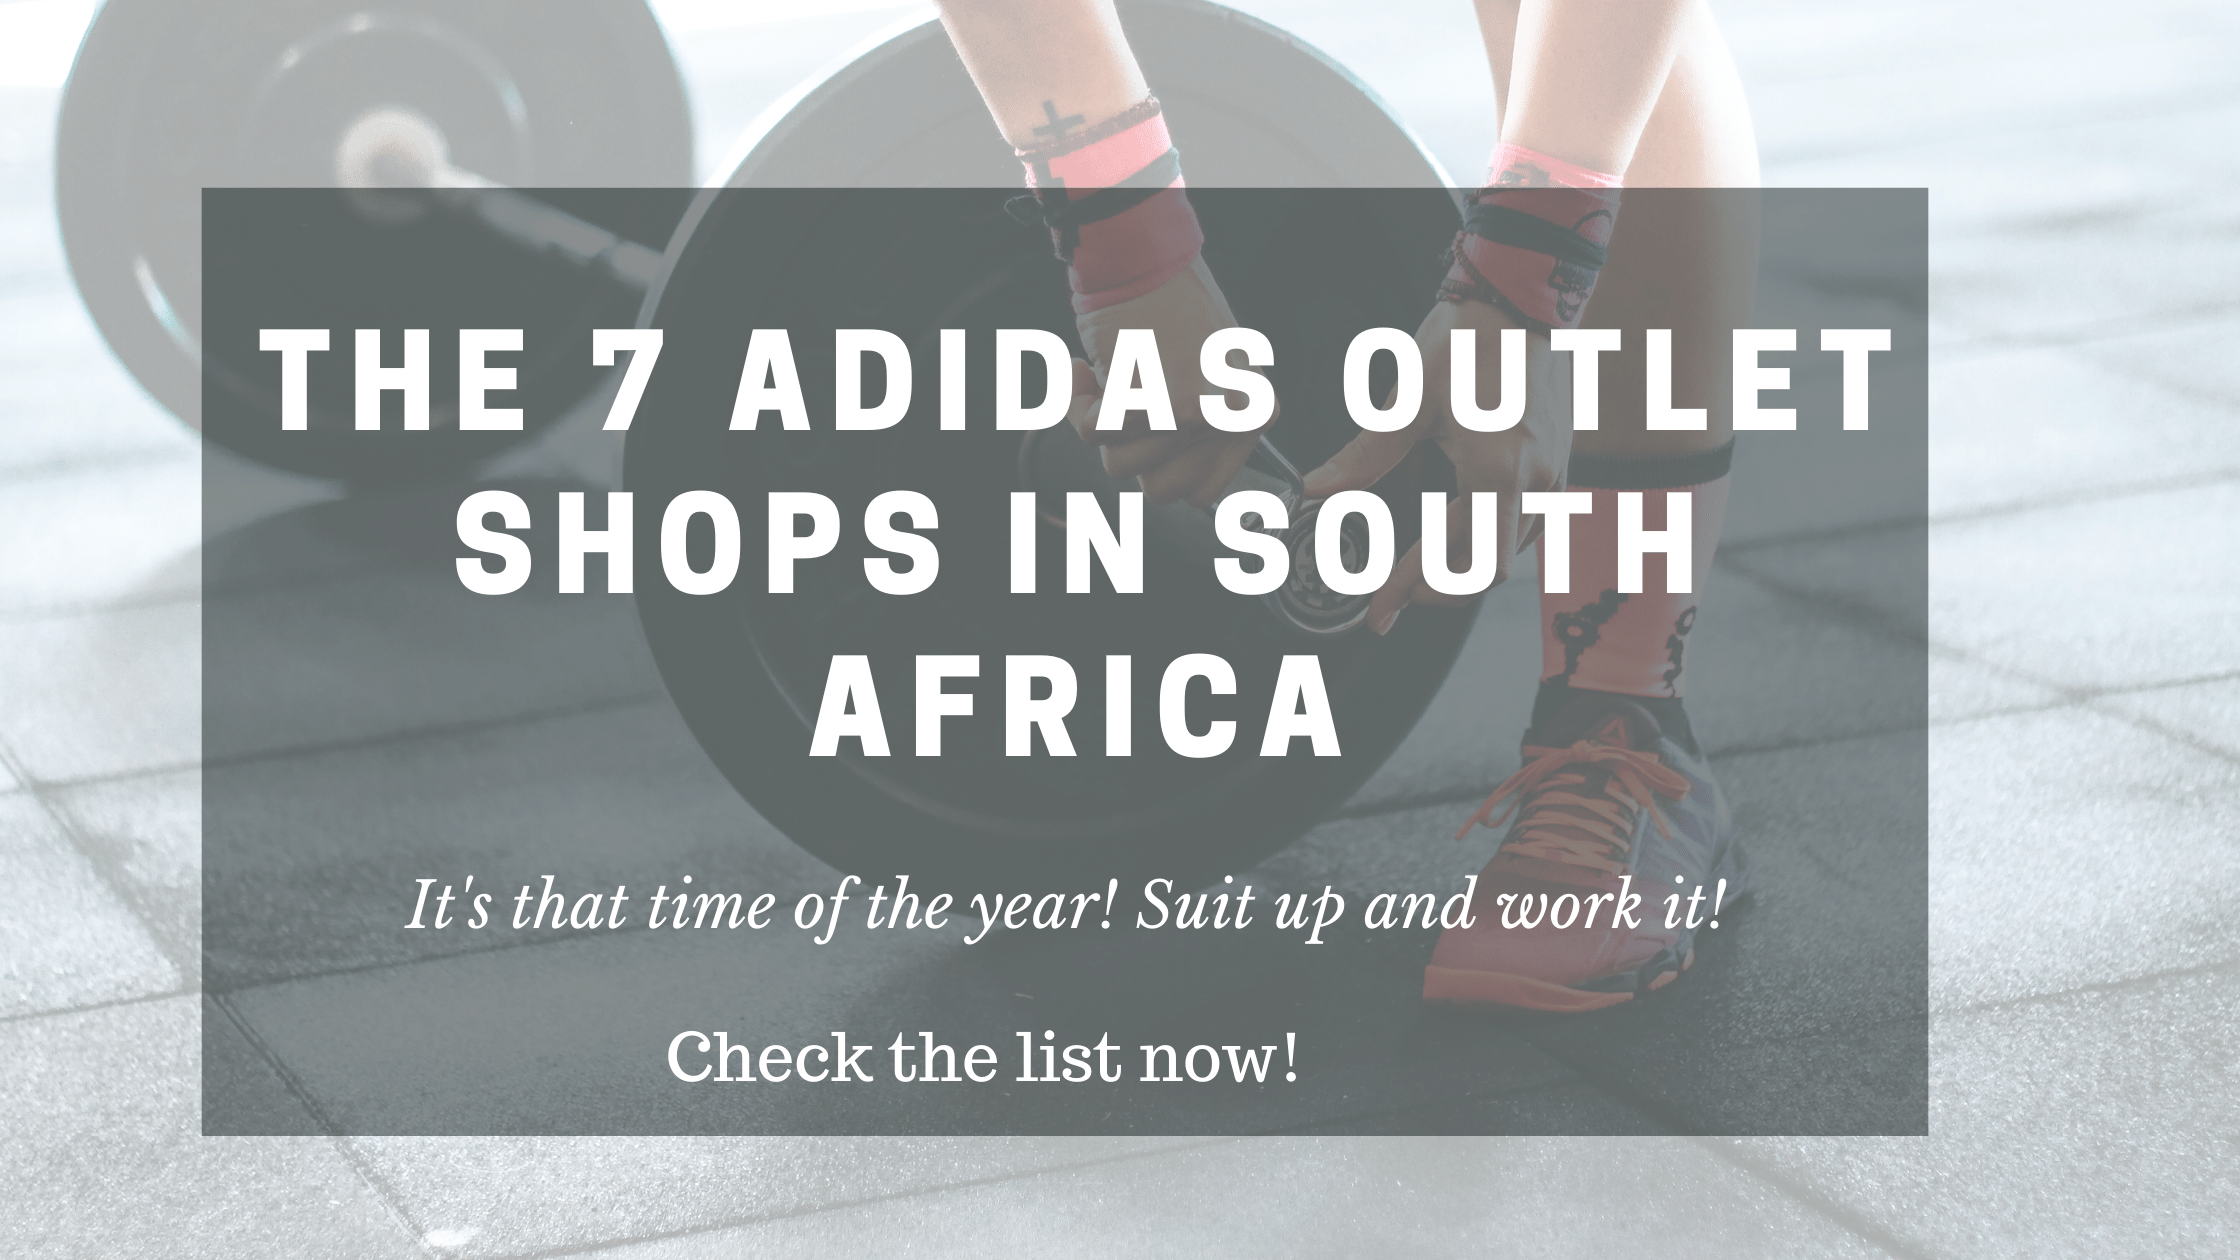 Adidas Outlet in Springfield, Woodmead, Access Park more!